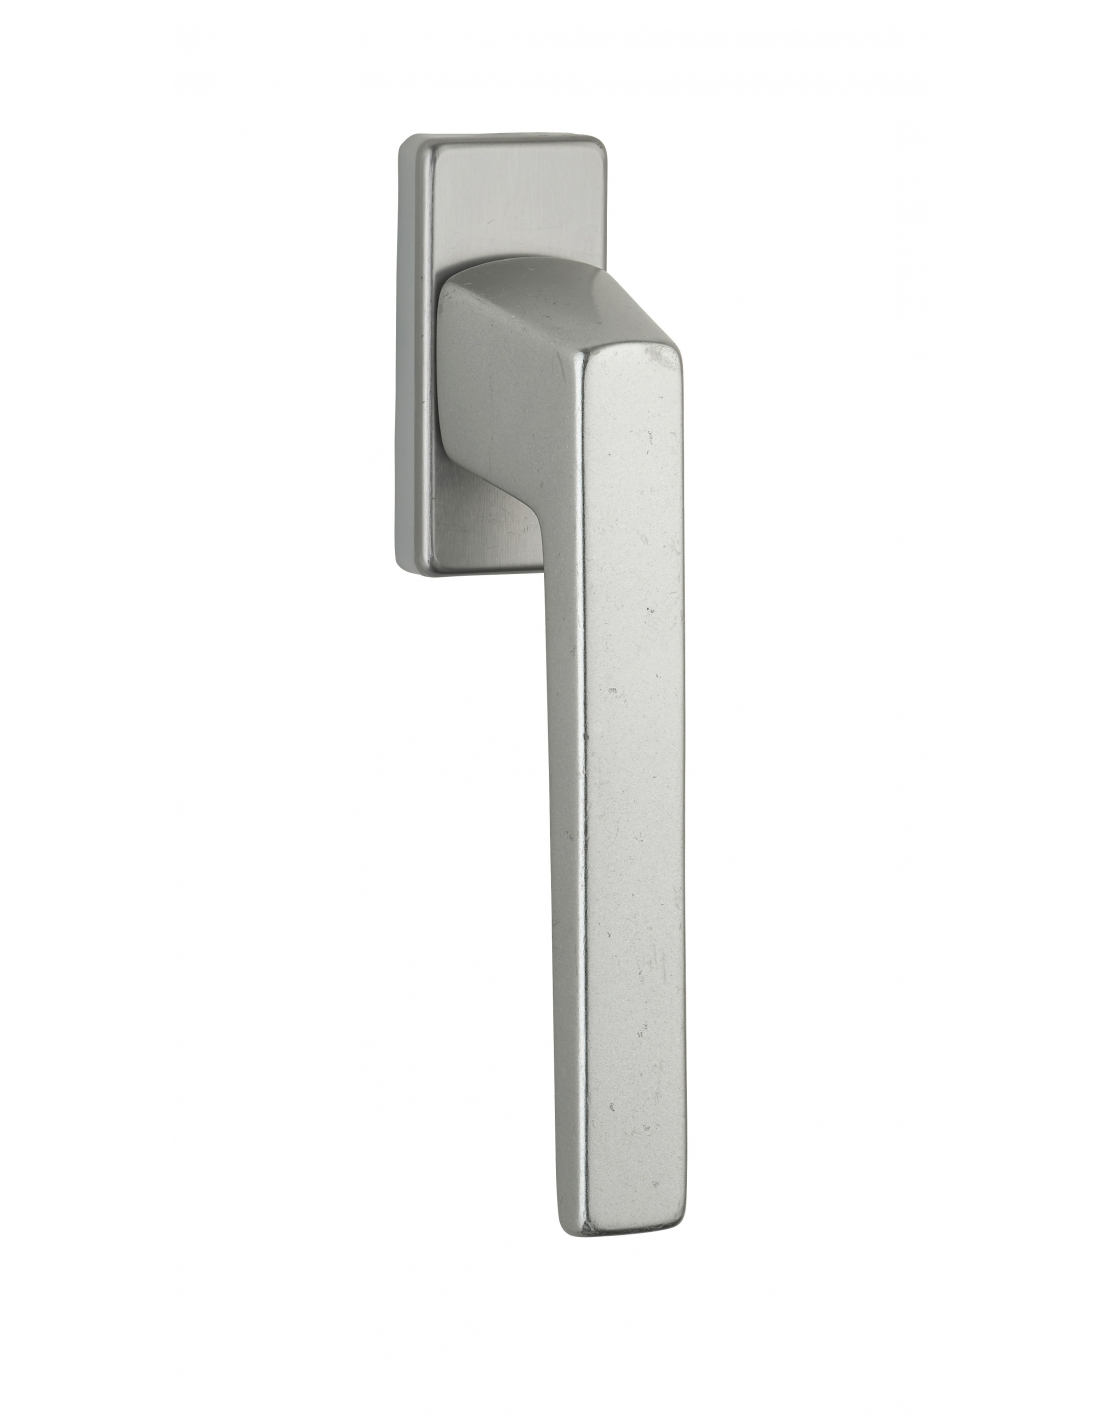 Window handle, Archimedean lever handle with concealed screw, stainless steel F9